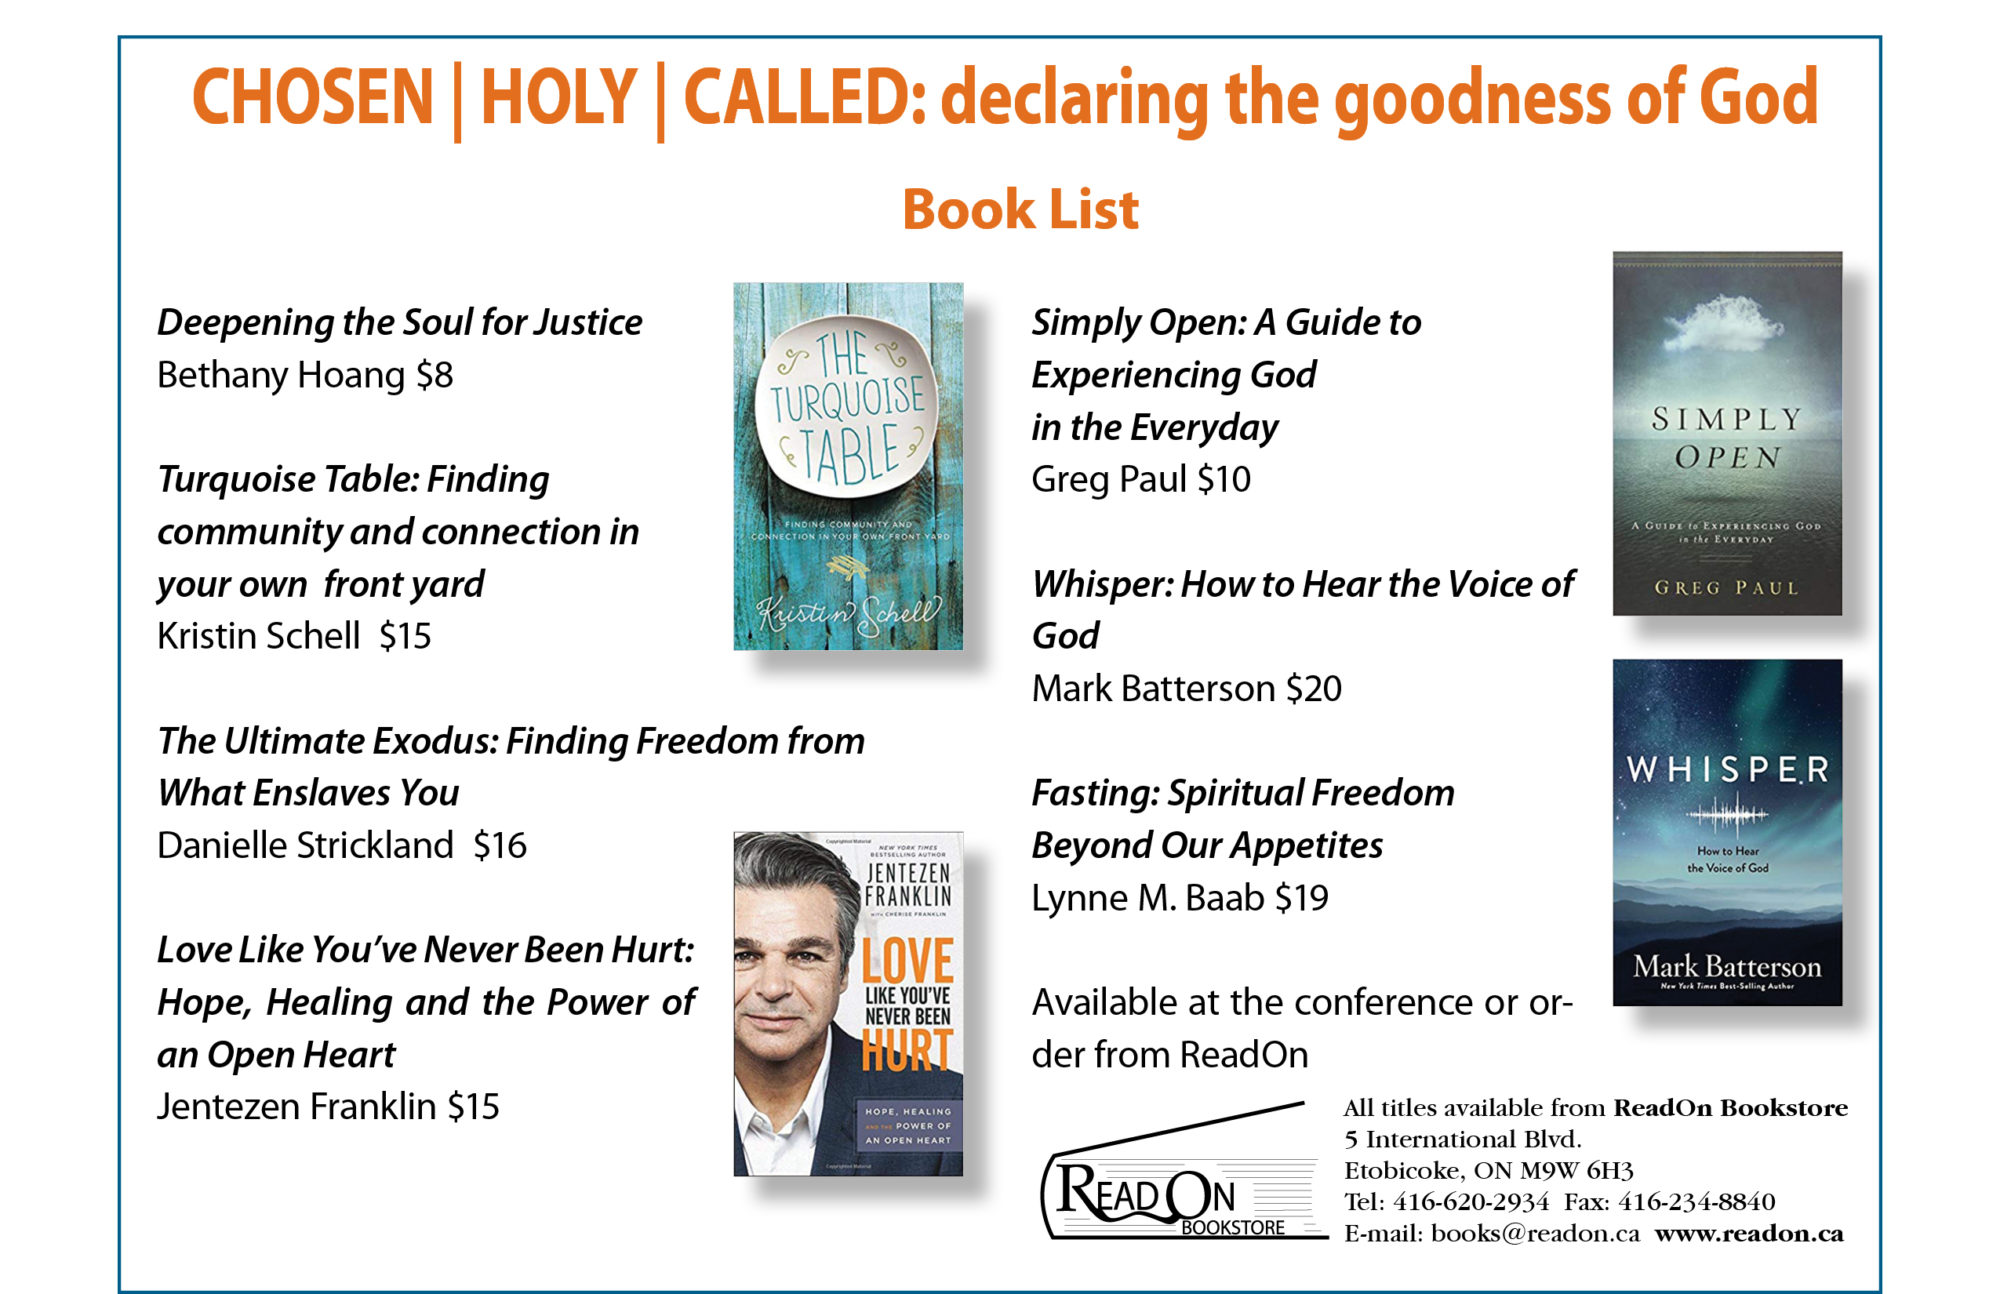 book list for Chosen | Holy | Called . . . declaring the goodness of God